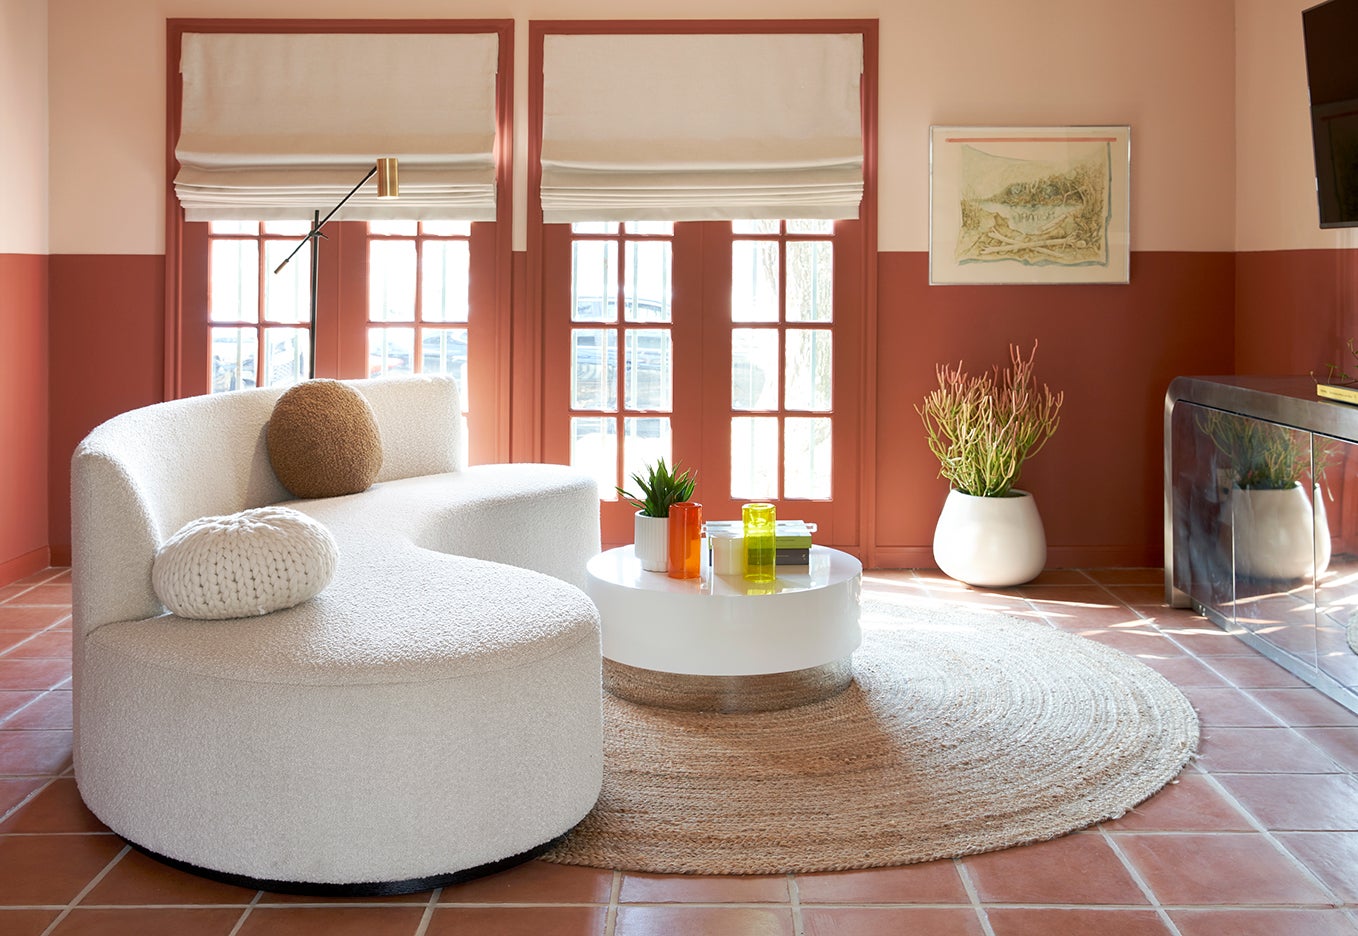 living room with terracotta half wall and trim